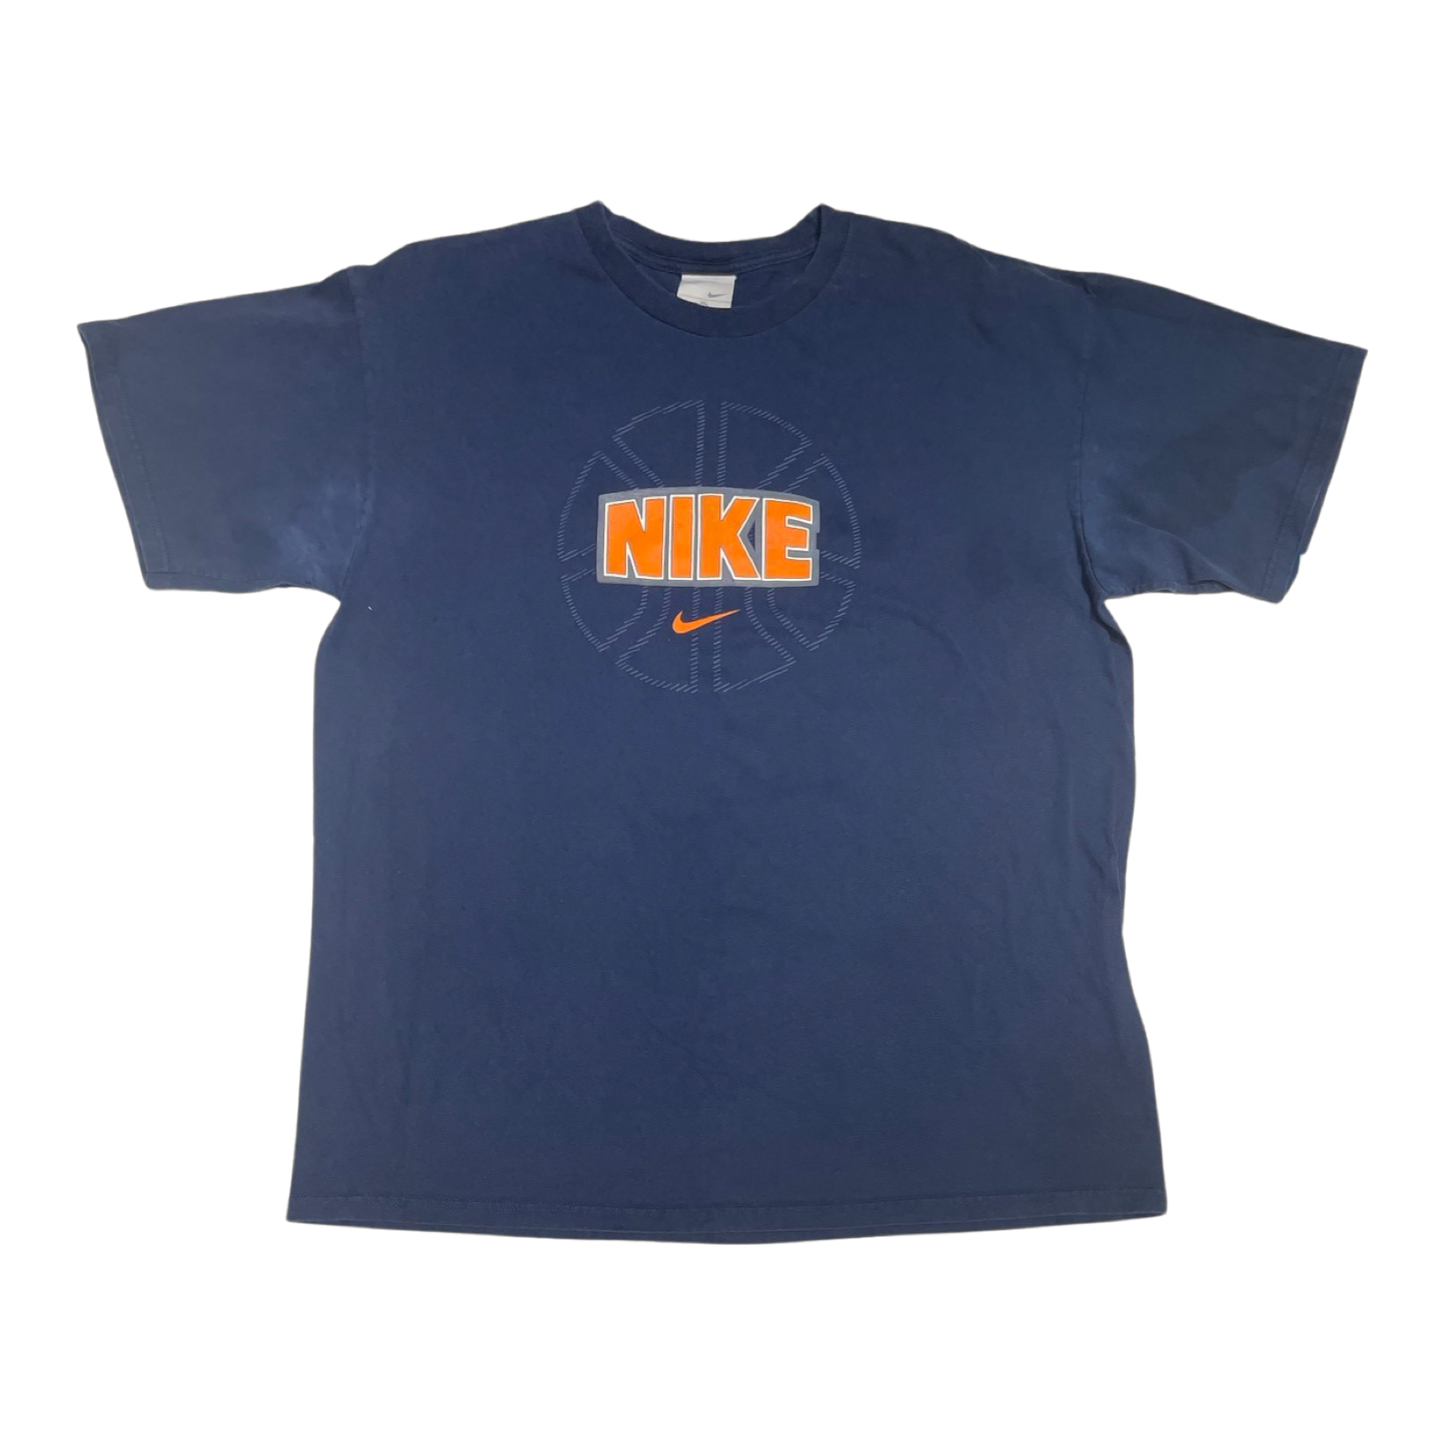 '00s Nike Spell Out Tee